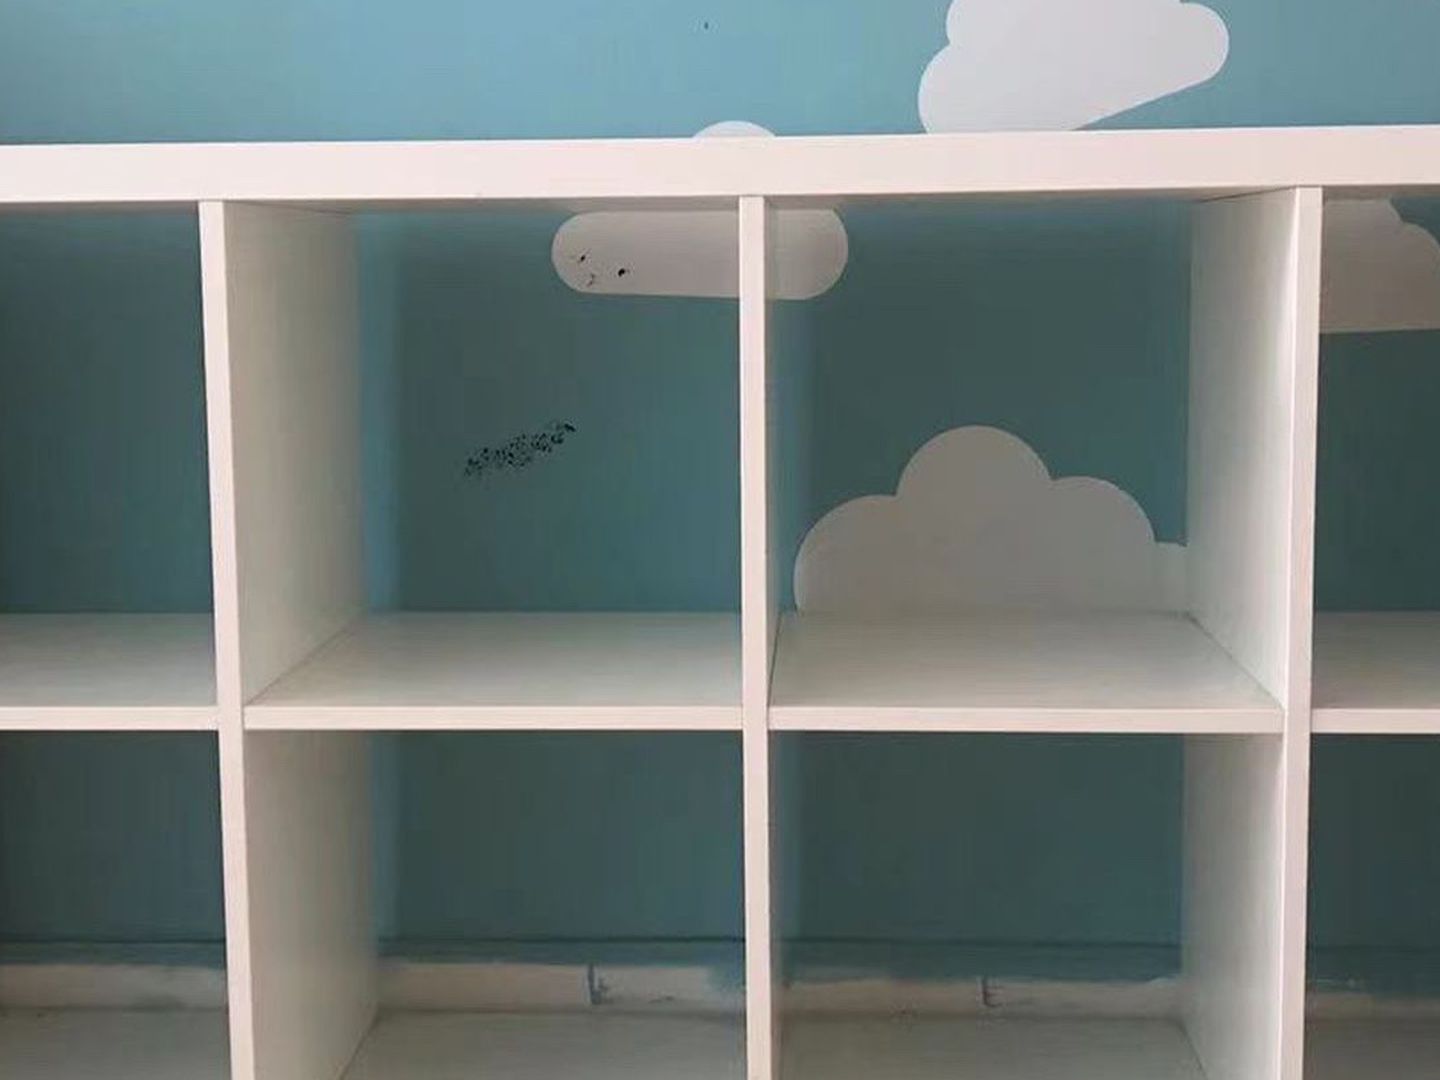 IKEA shelves For TV And Storage